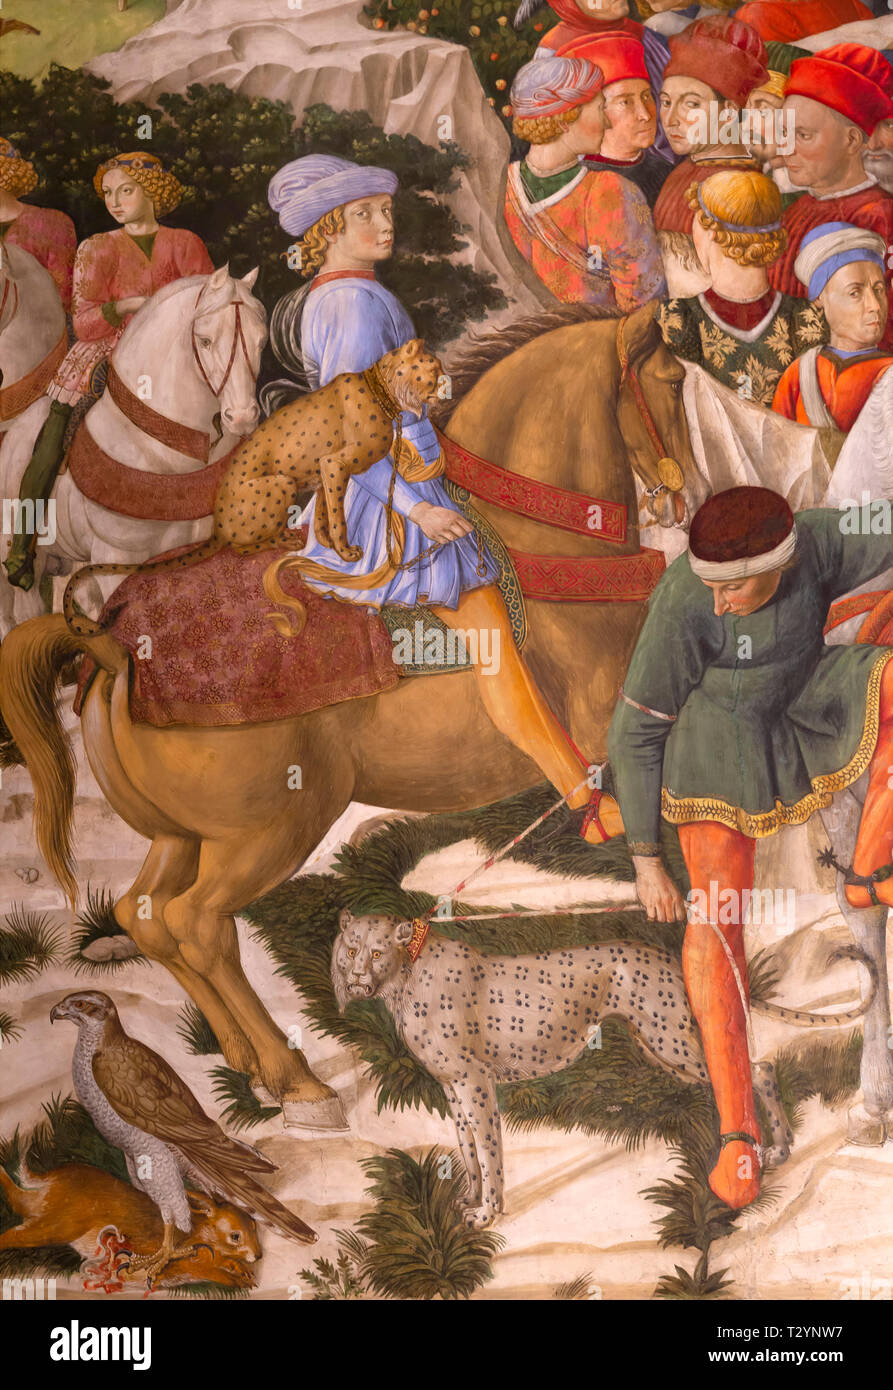 Giuliano de' Medici as a teenager with Leopard, Procession of the Old King, west wall, Fresco cycle, Procession of the Magi, Benozzo Gozzoli, circa 14 Stock Photo